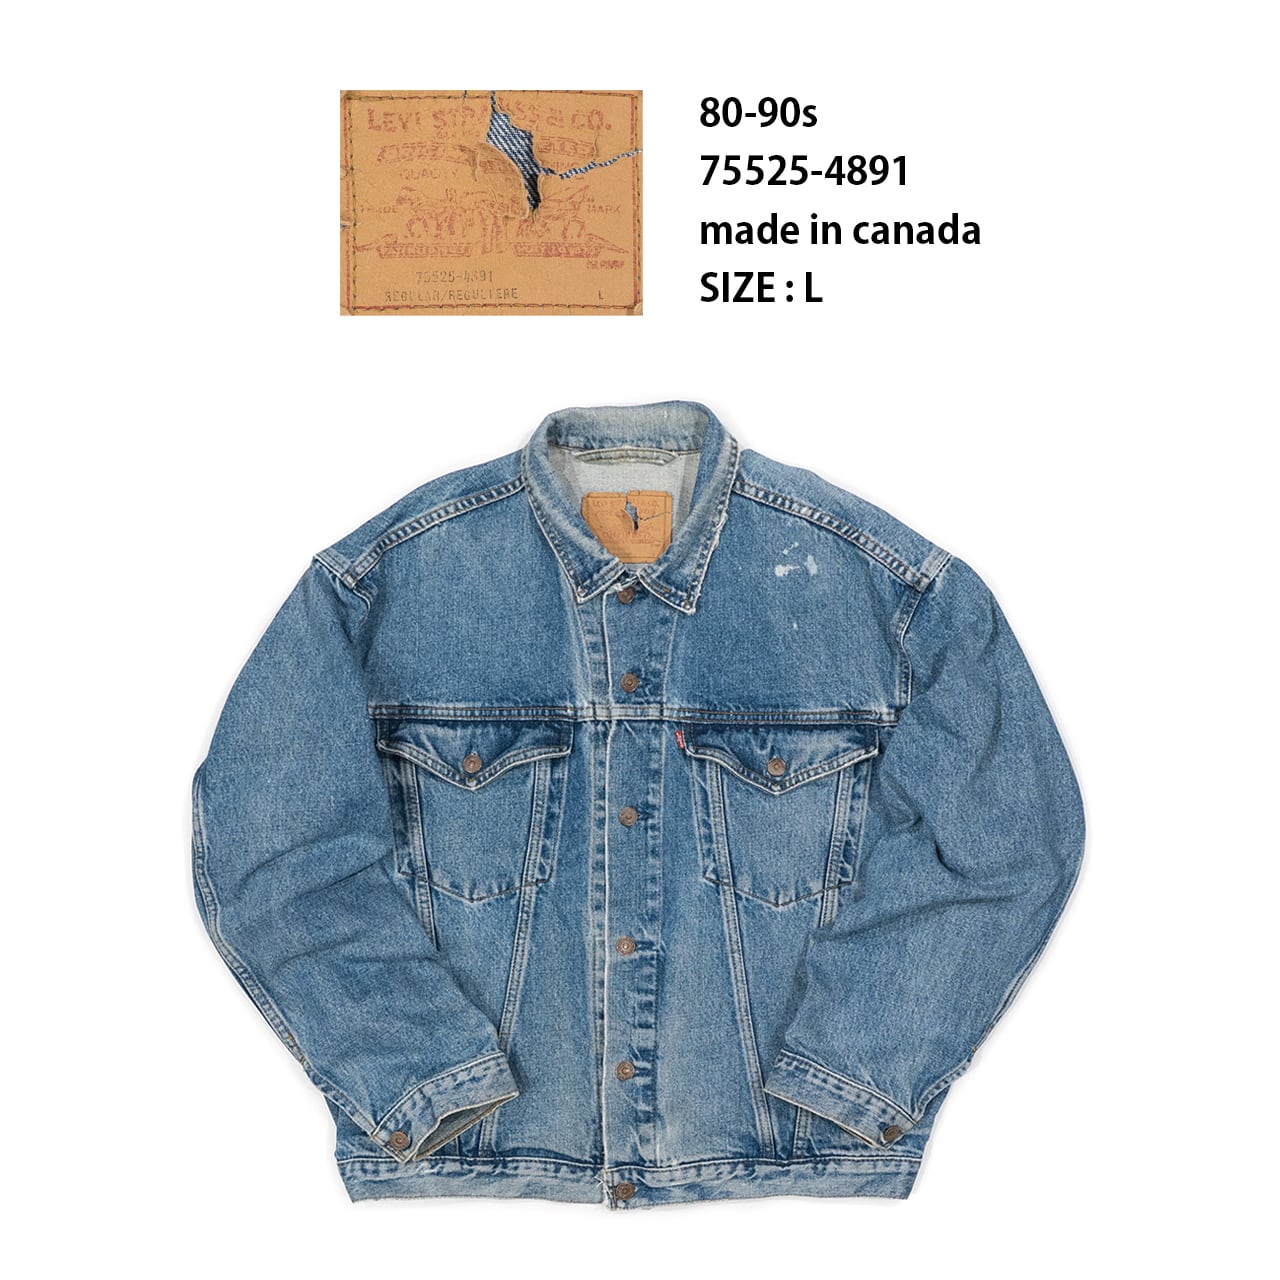 USED 80-90s Levi's 75525-4891 trucker jacket (L) made in canada